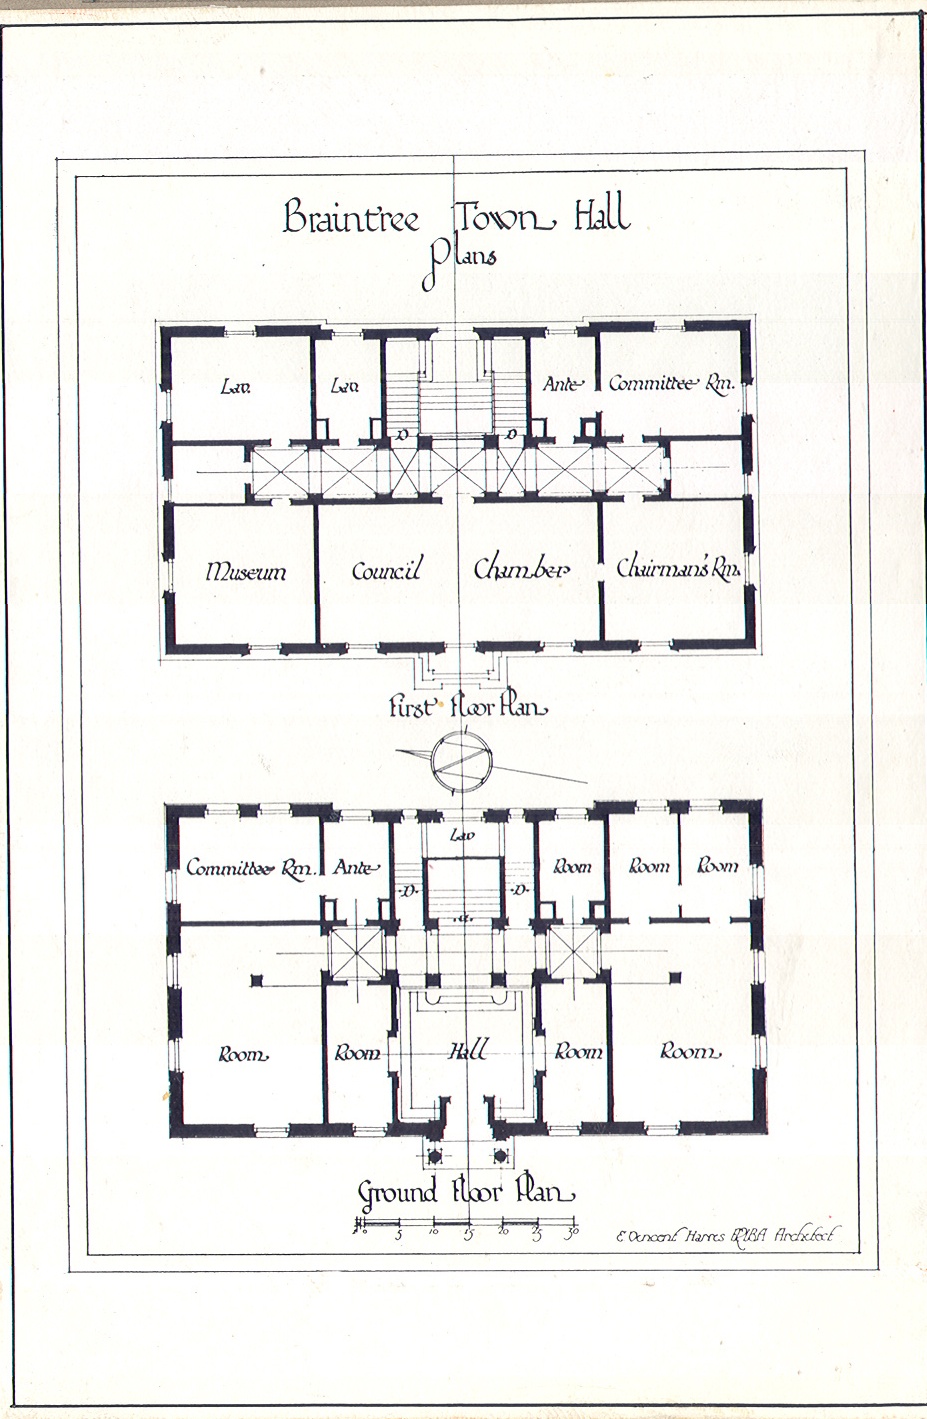 original plan for Braintree town hall layout